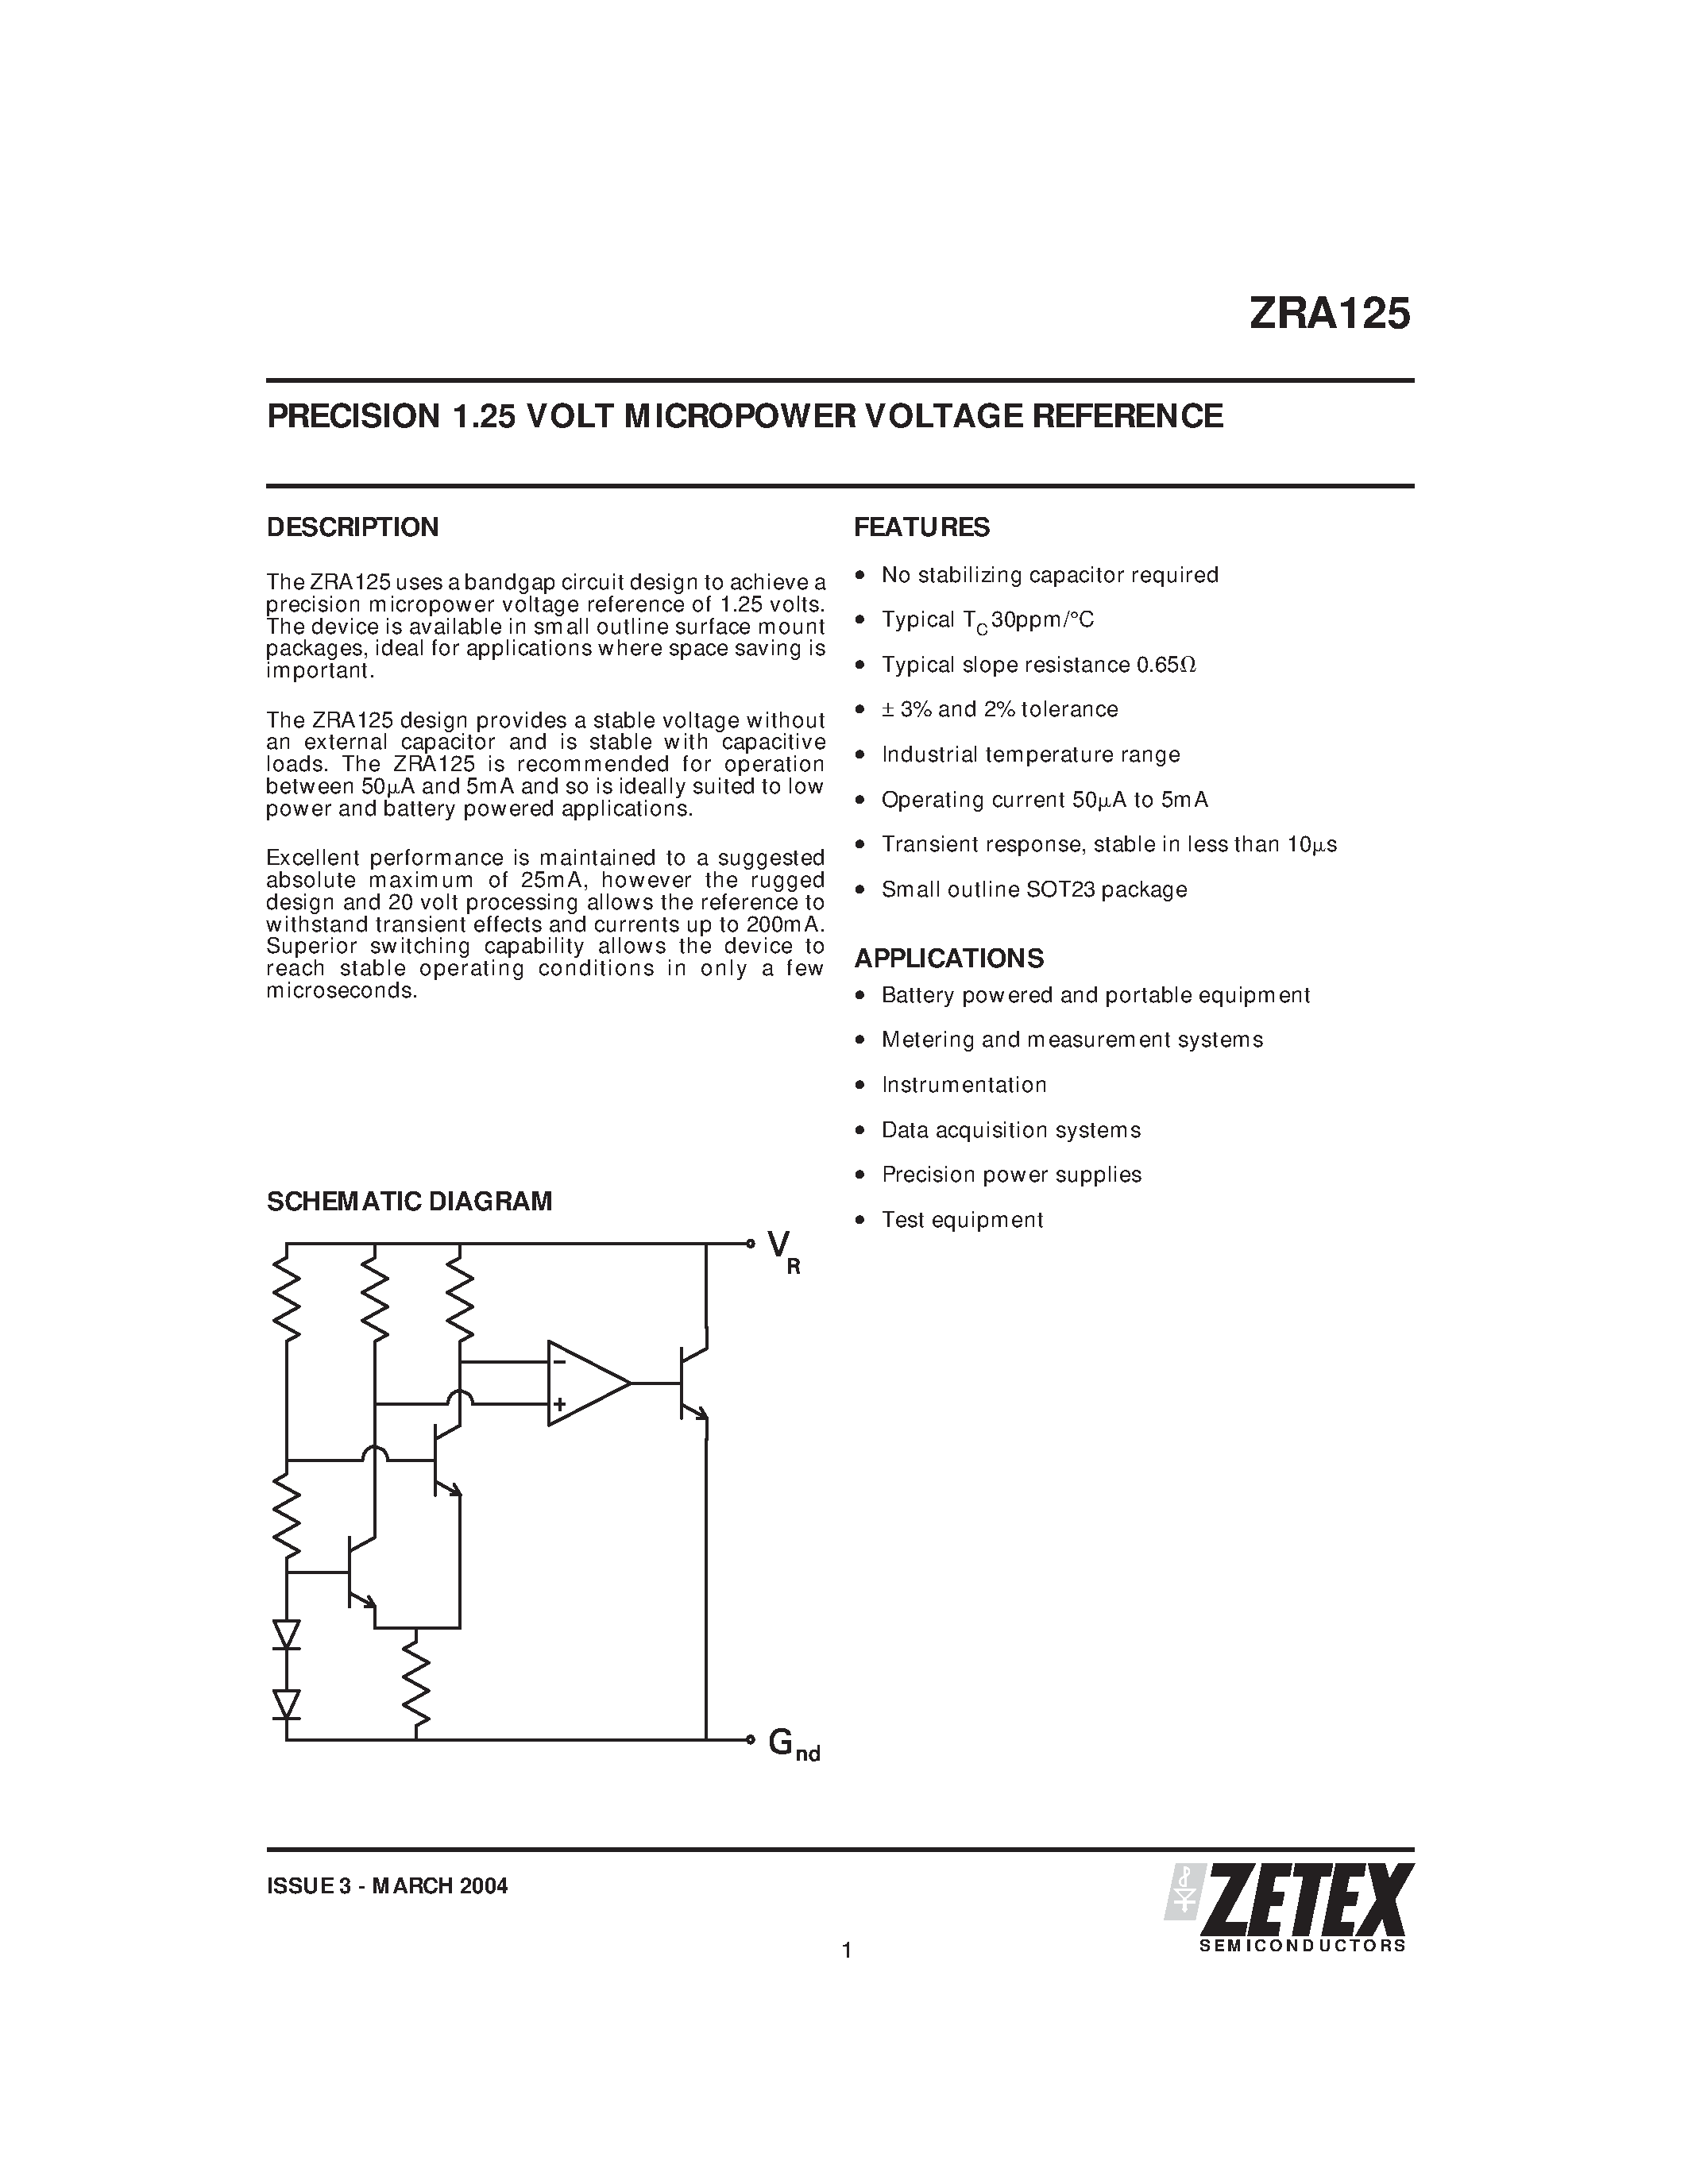 Datasheet ZRA125 - PRECISION 1.25 VOLT MICROPOWER VOLTAGE REFERENCE page 1